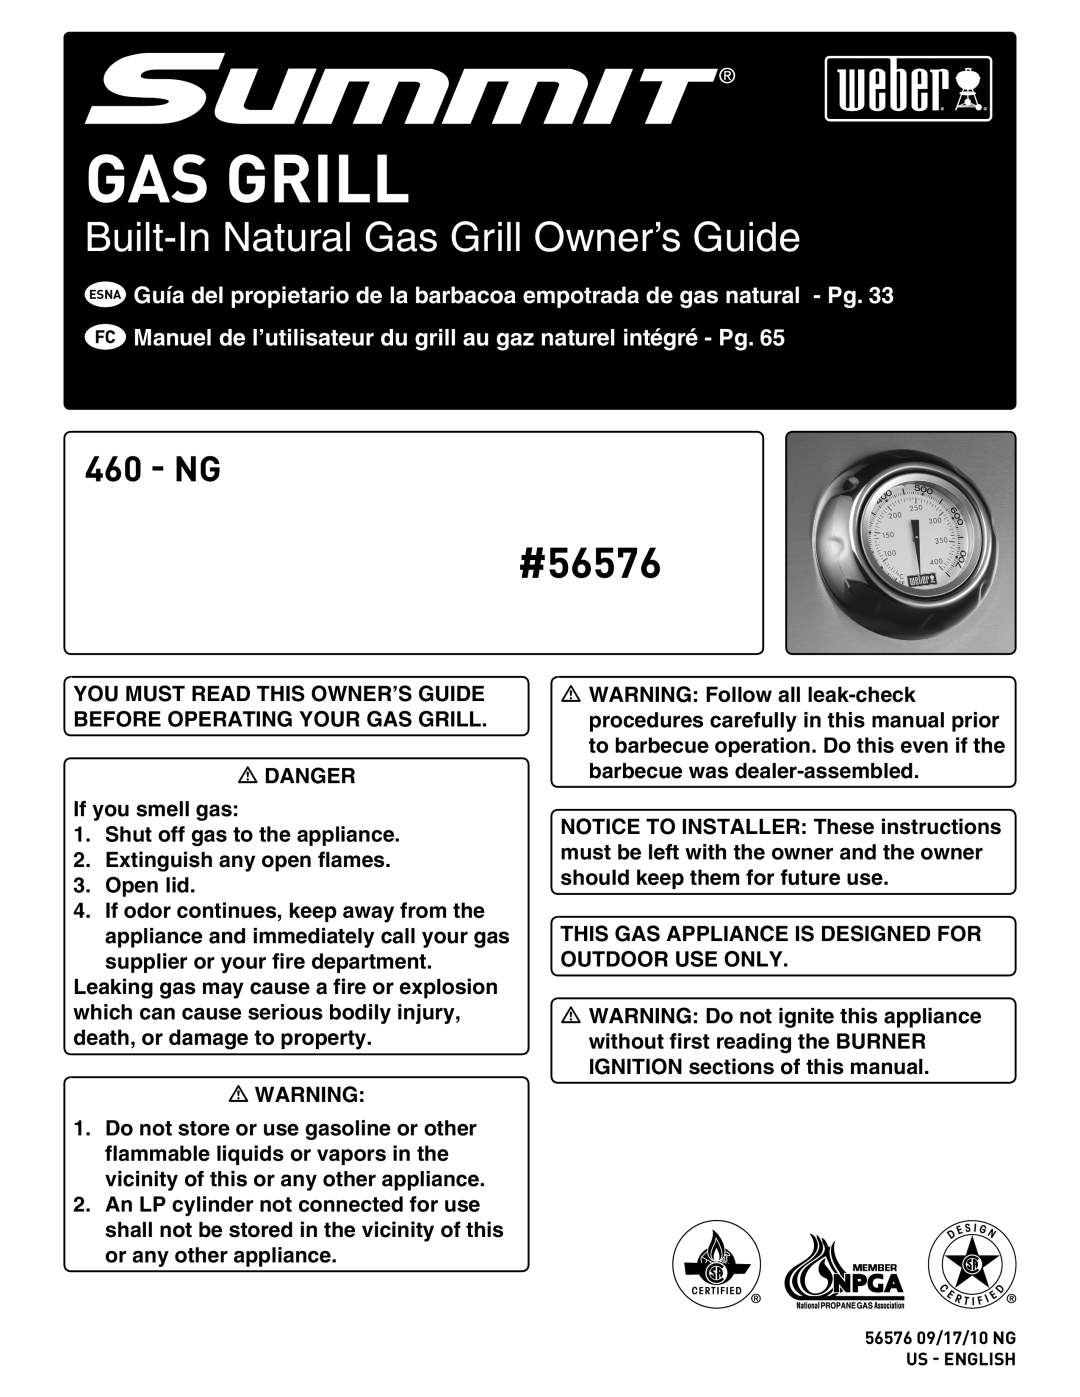 Weber manual #56576, Built-In Natural Gas Grill Owner’s Guide, Ng 